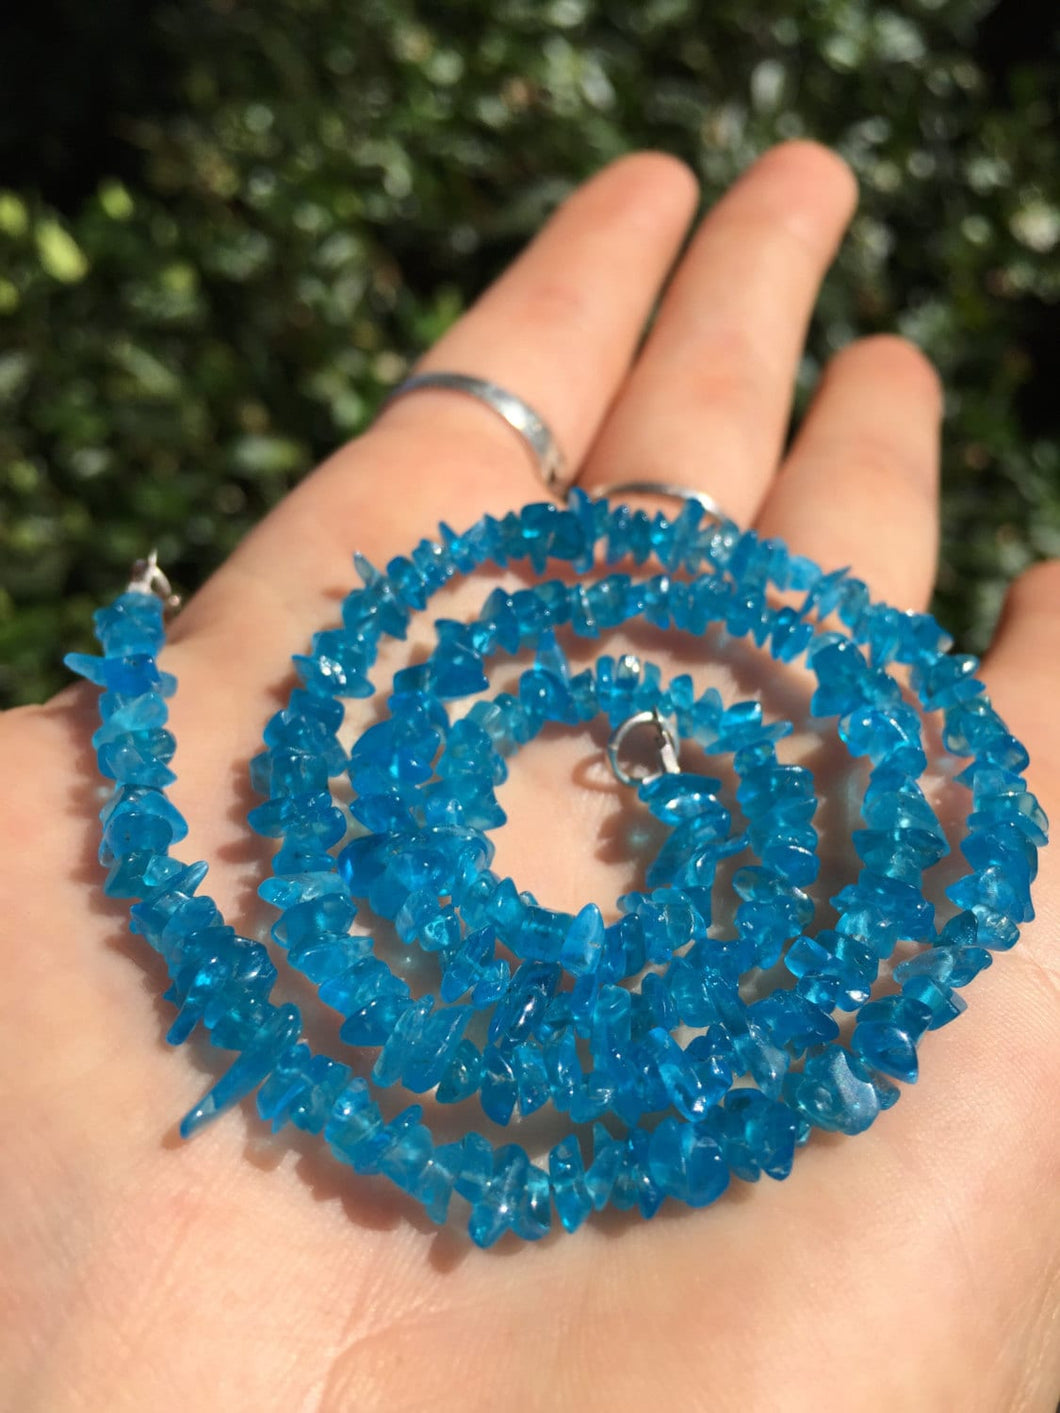 Apatite Bright Electric Blue Crystal Stone Necklace Chip Bead